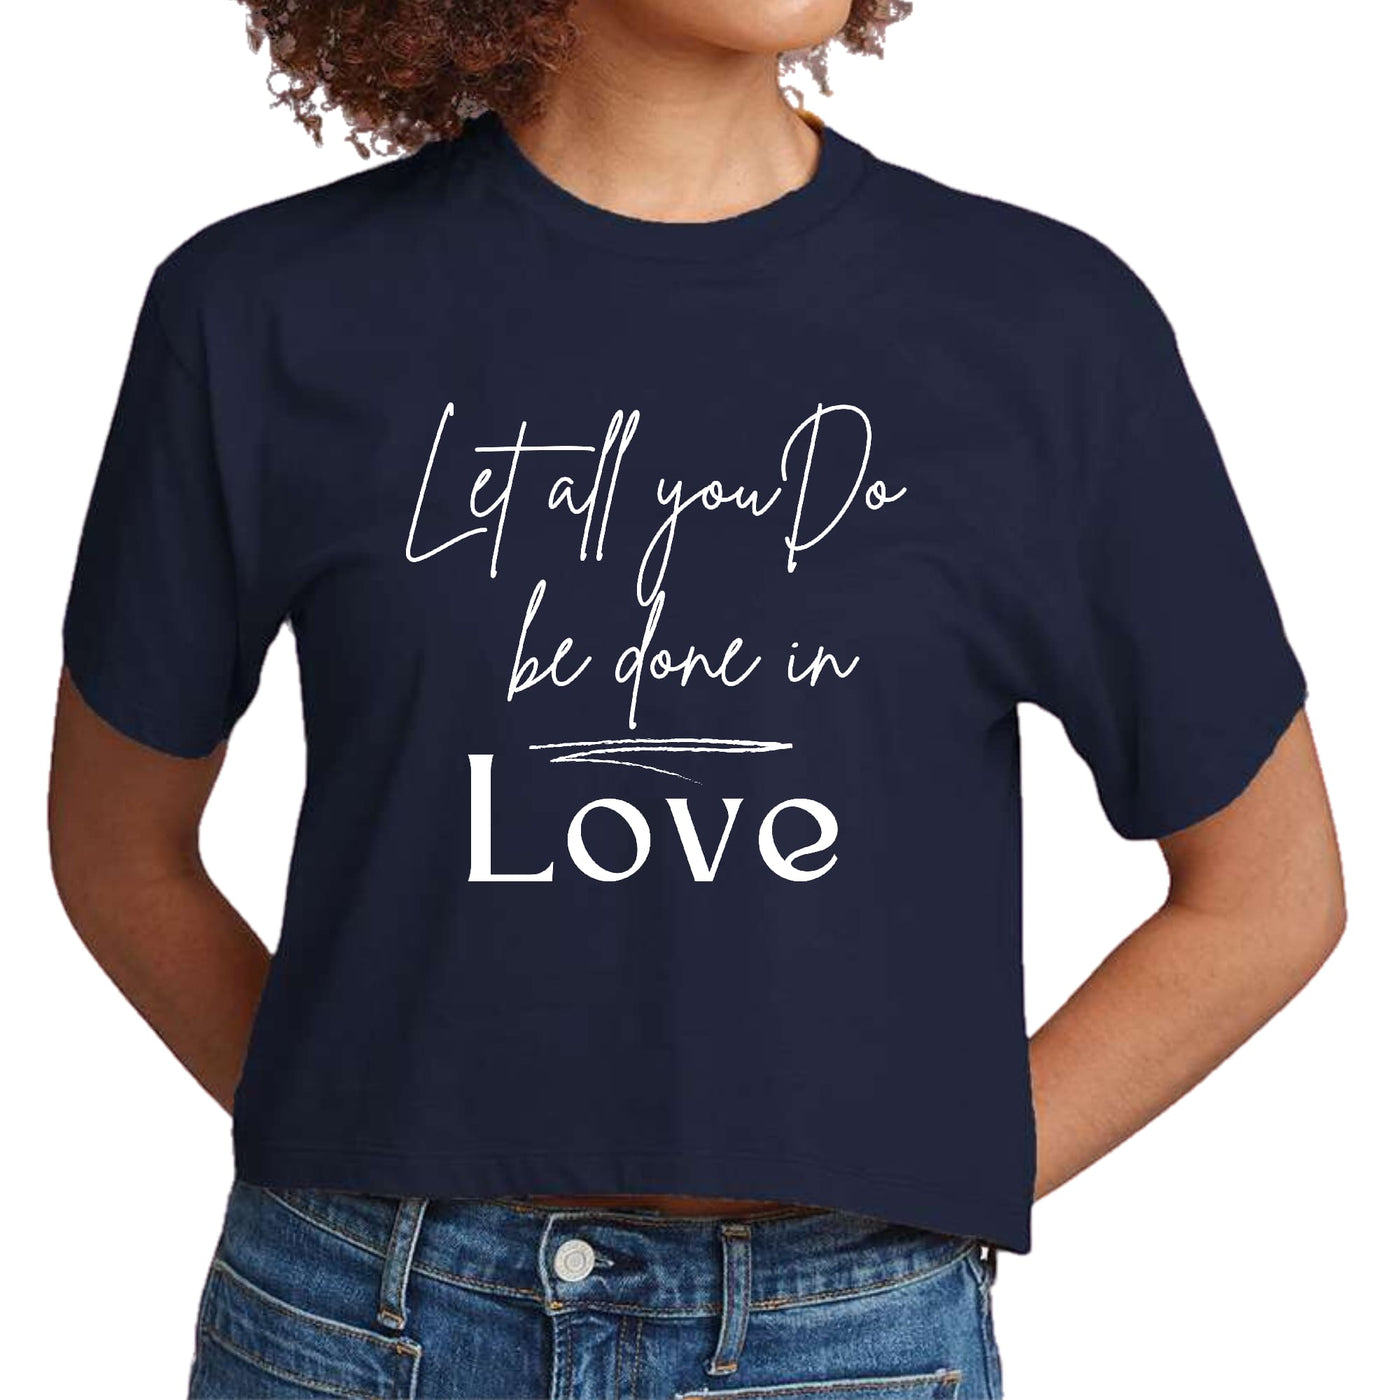 Womens Cropped Graphic T-shirt Let All You Do Be Done In Love - Womens